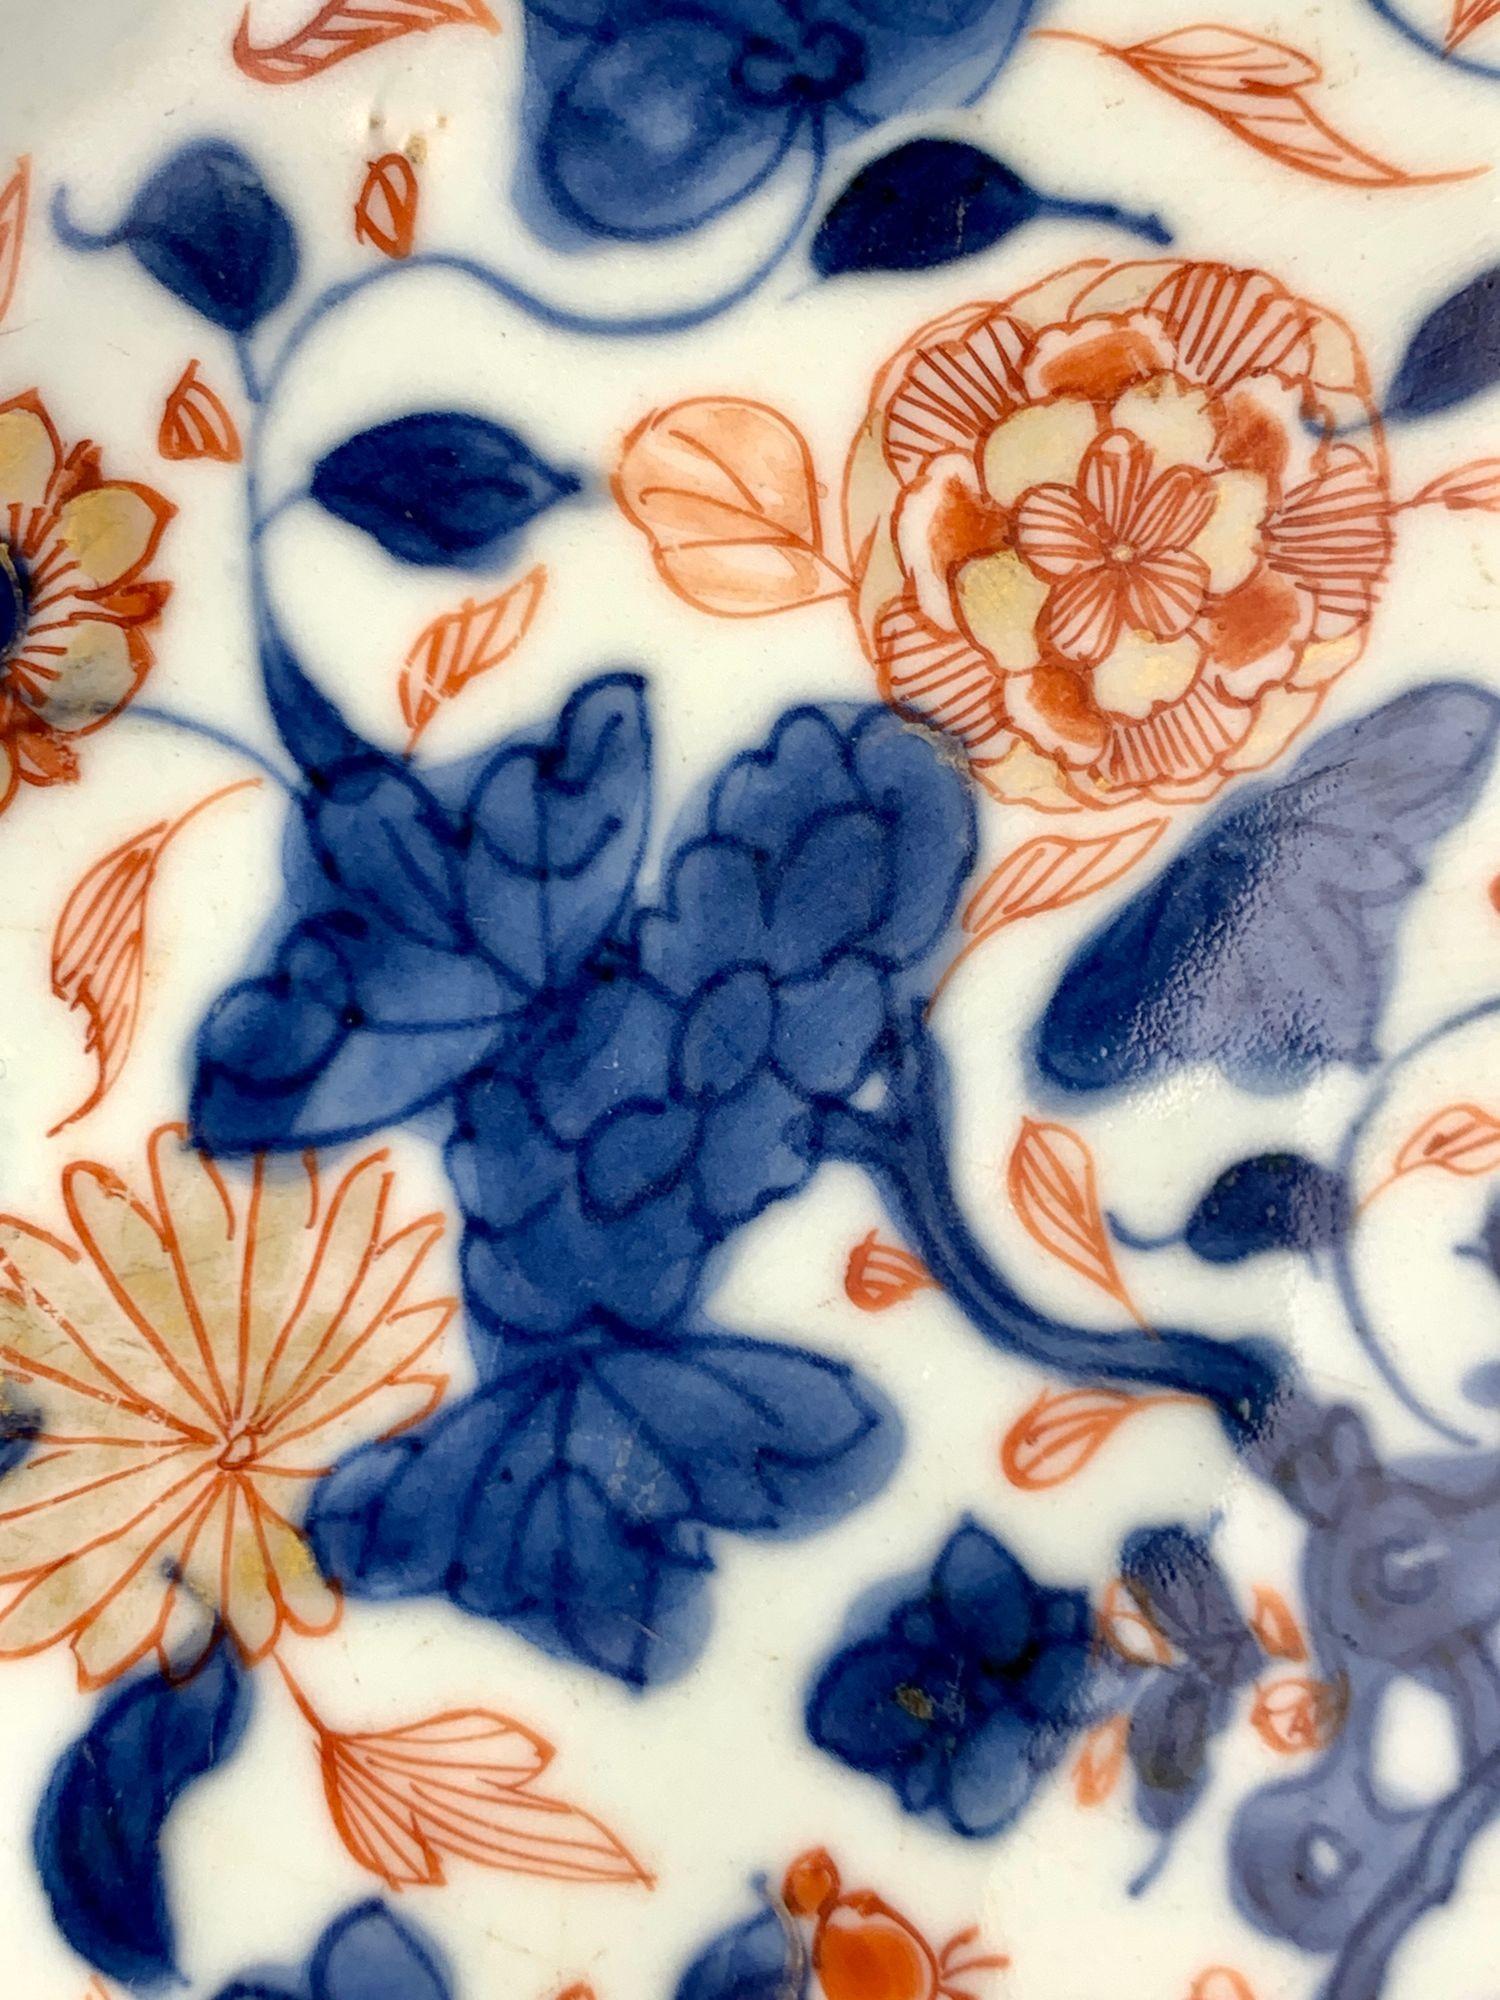 This large Chinese Imari porcelain charger dates to the Qianlong period of the Qing dynasty, circa 1760.   Finely potted with a lovely rich, glassy white glaze, the charger is hand-painted in a vivid Imari palette of orange-red, cobalt blue, and